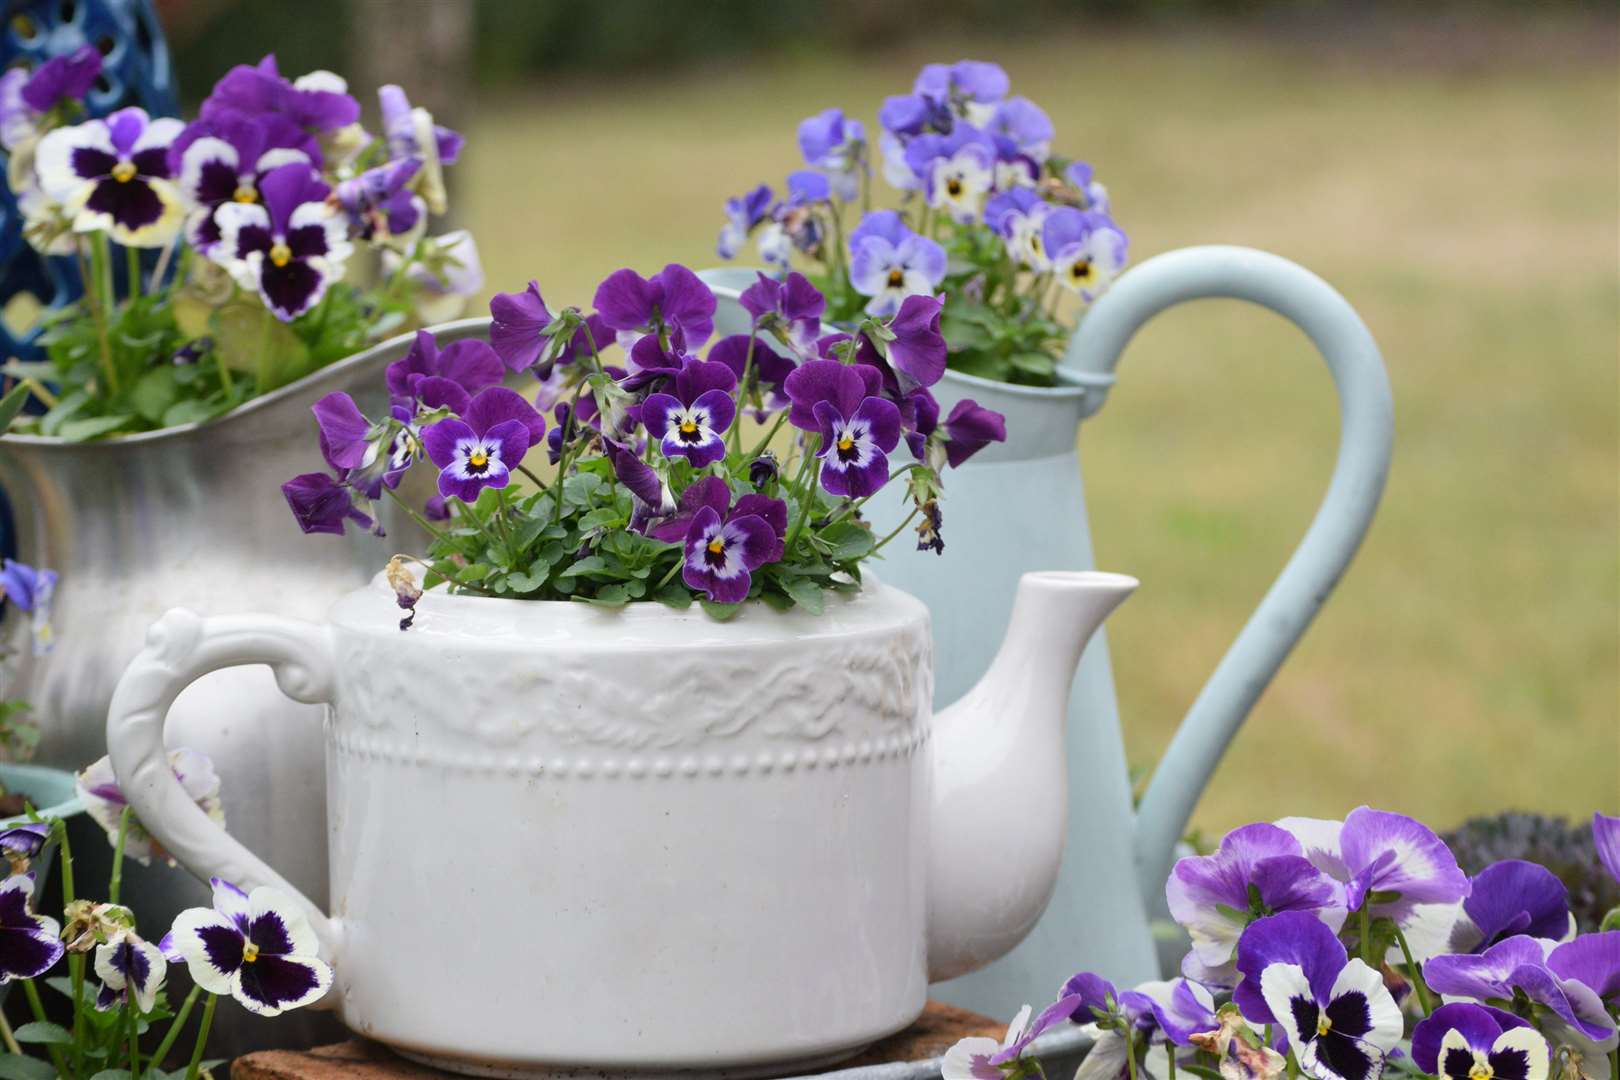 Old teapots and jugs make lovely plant containers. Picture: iStock/PA